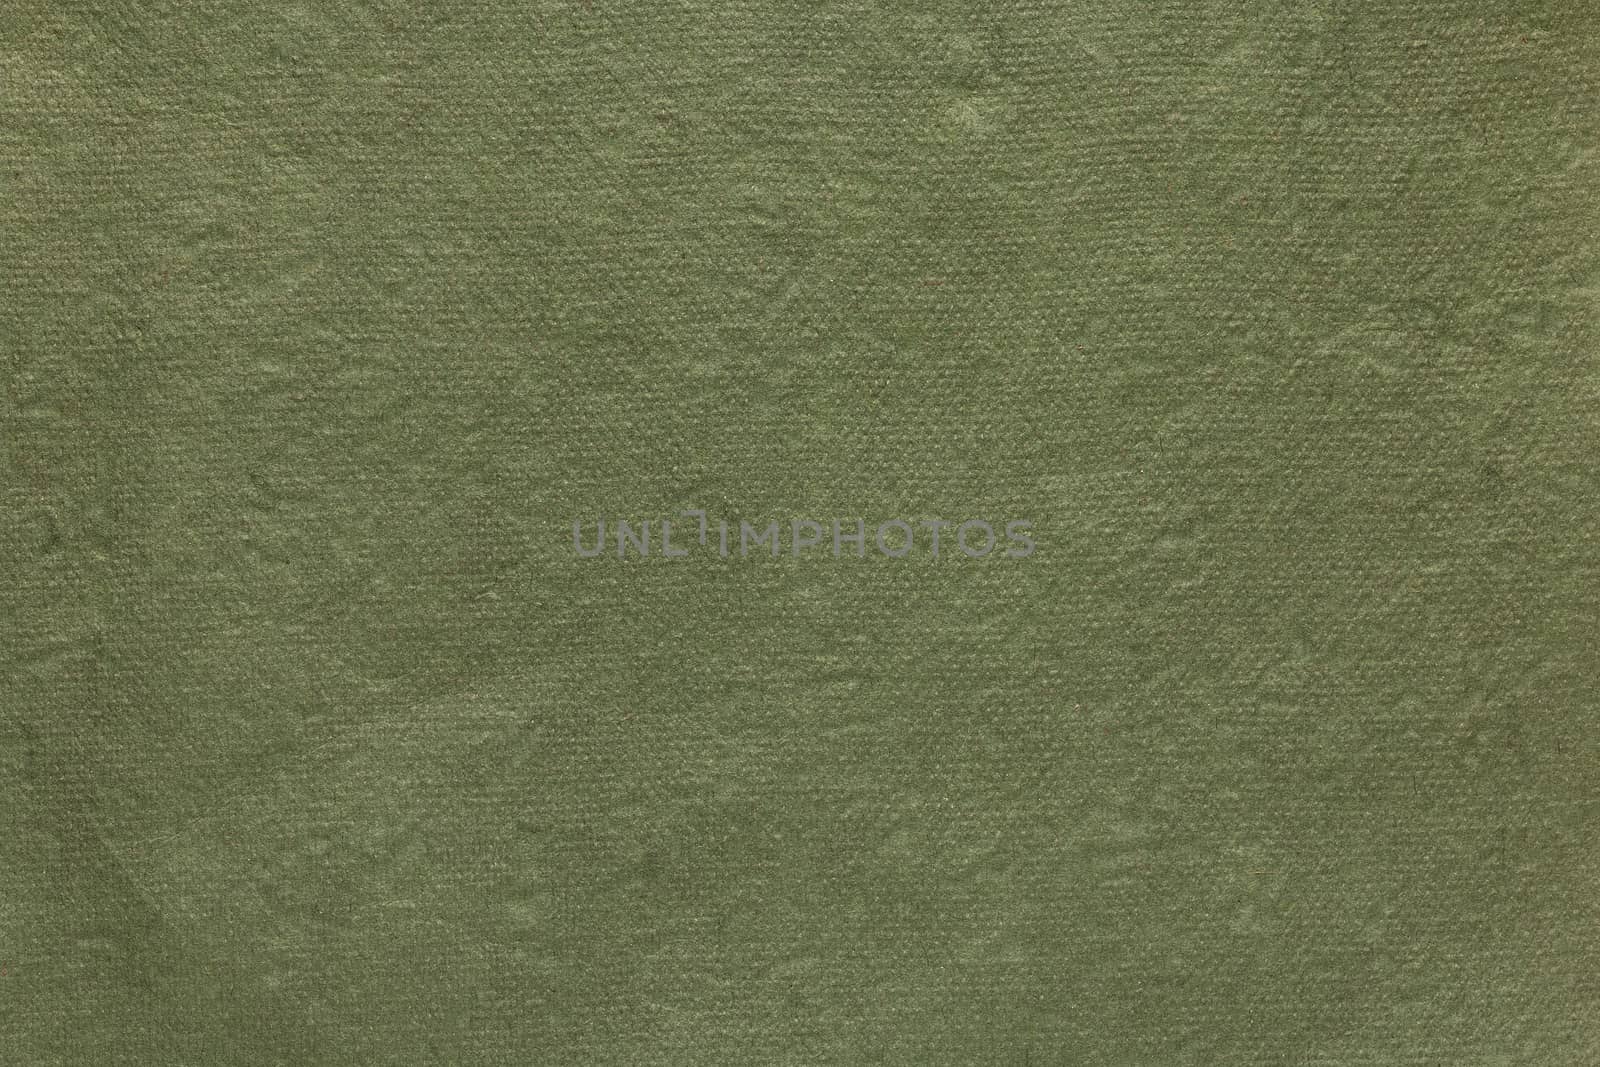 Green recycled paper texture background by ivo_13